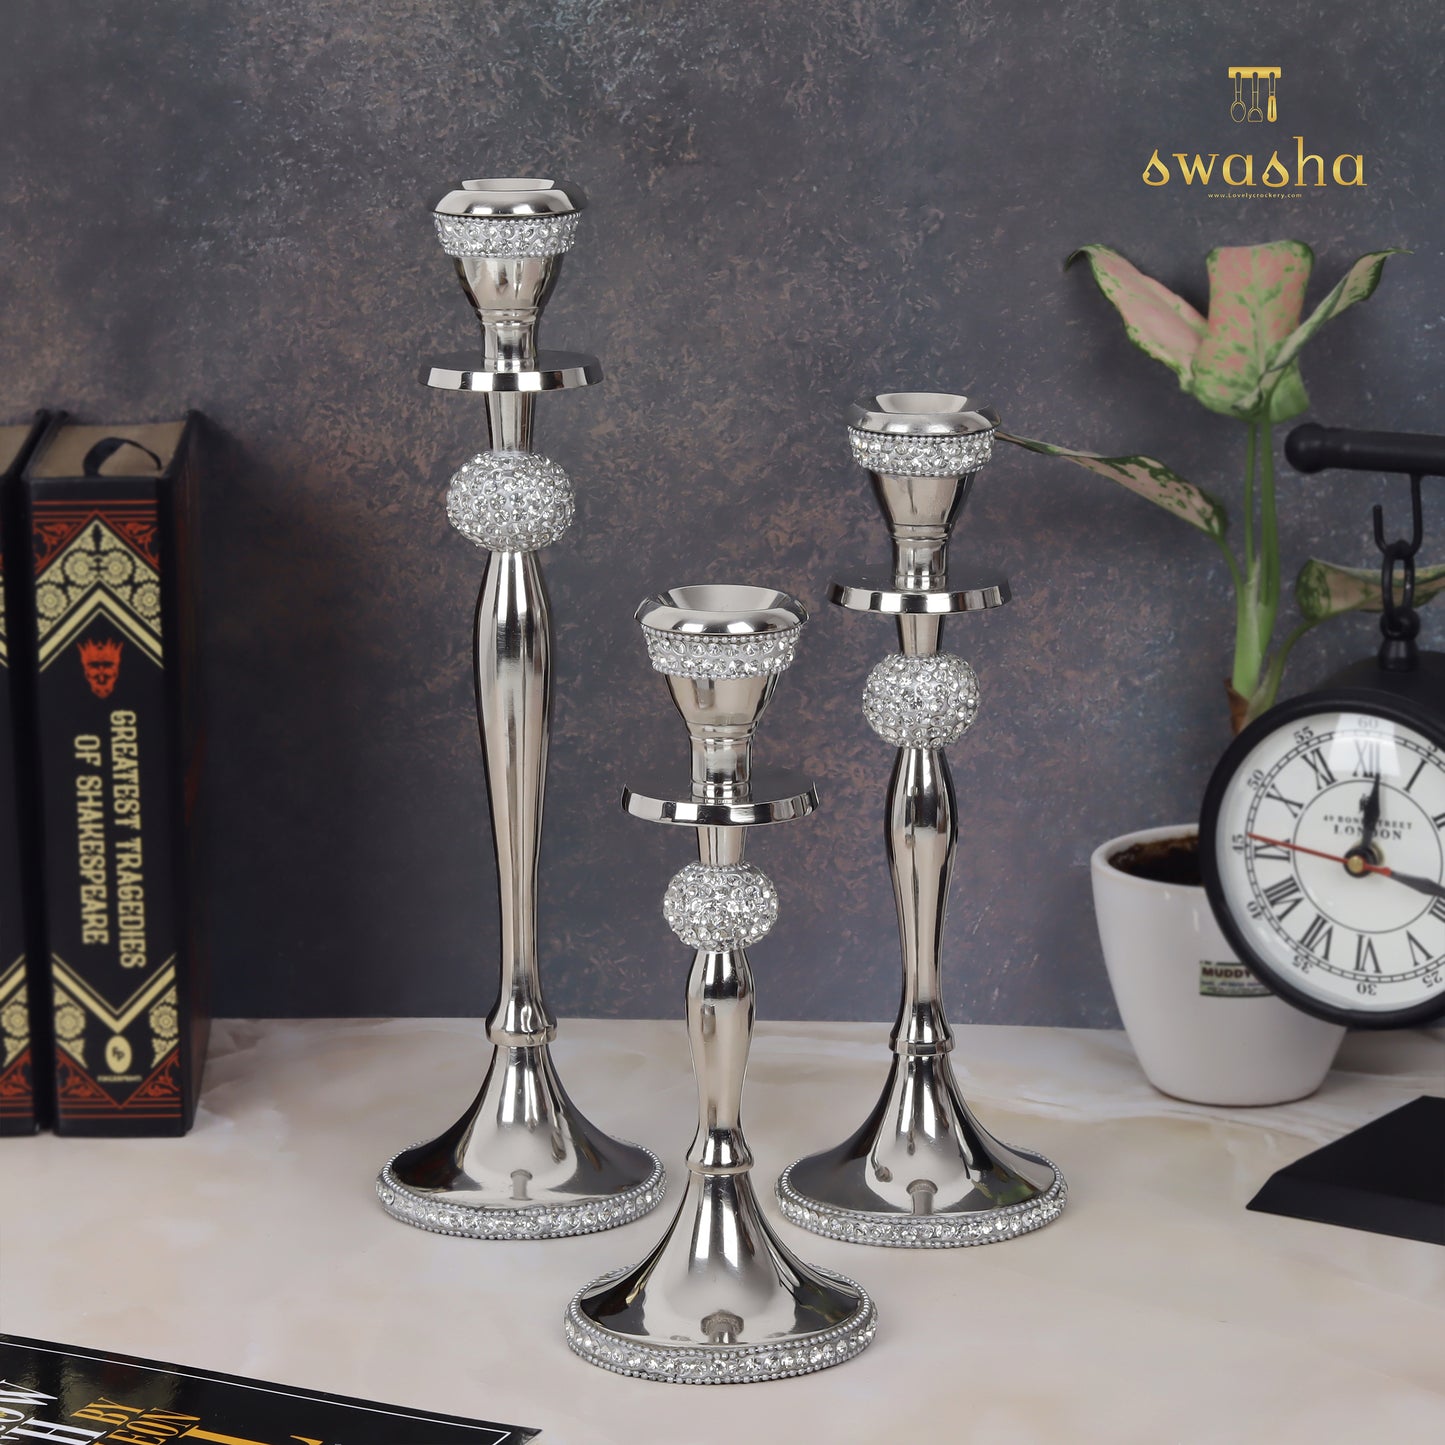 Swasha's elegant candle stands set of 3 - perfect for ambient lighting and decor accents